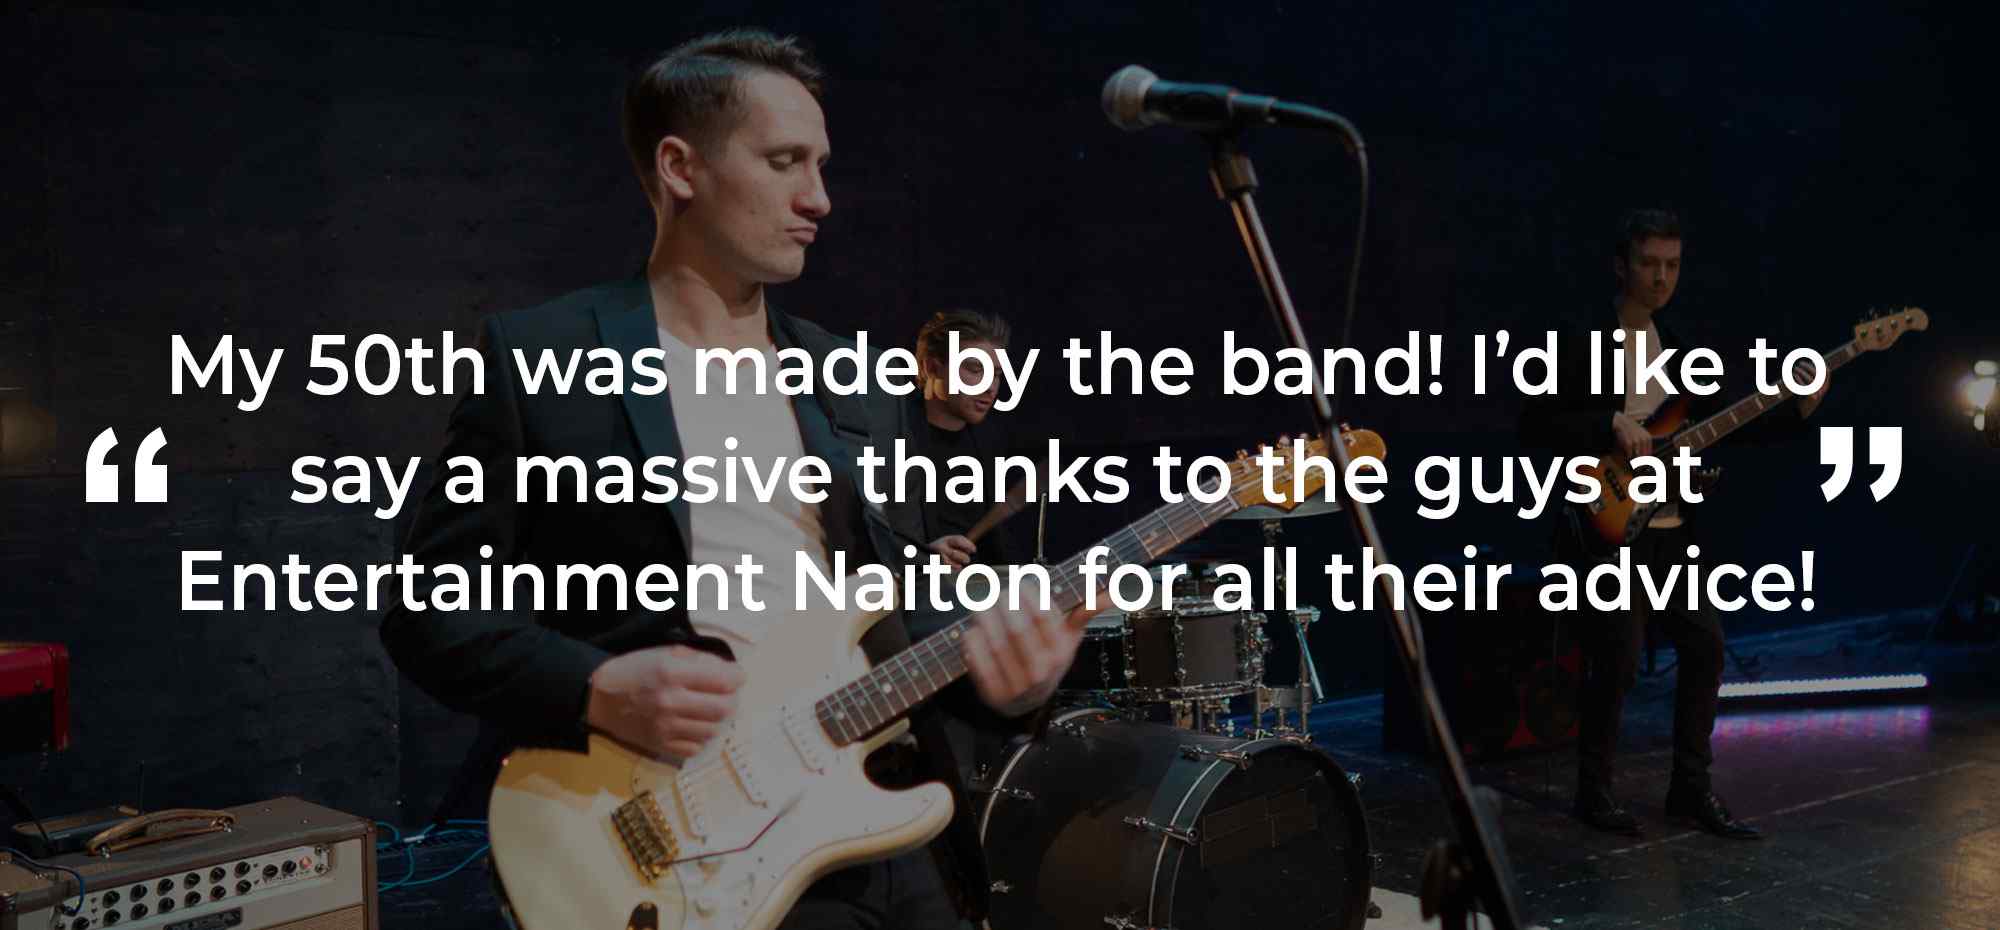 Client Review of a Party Band Merseyside